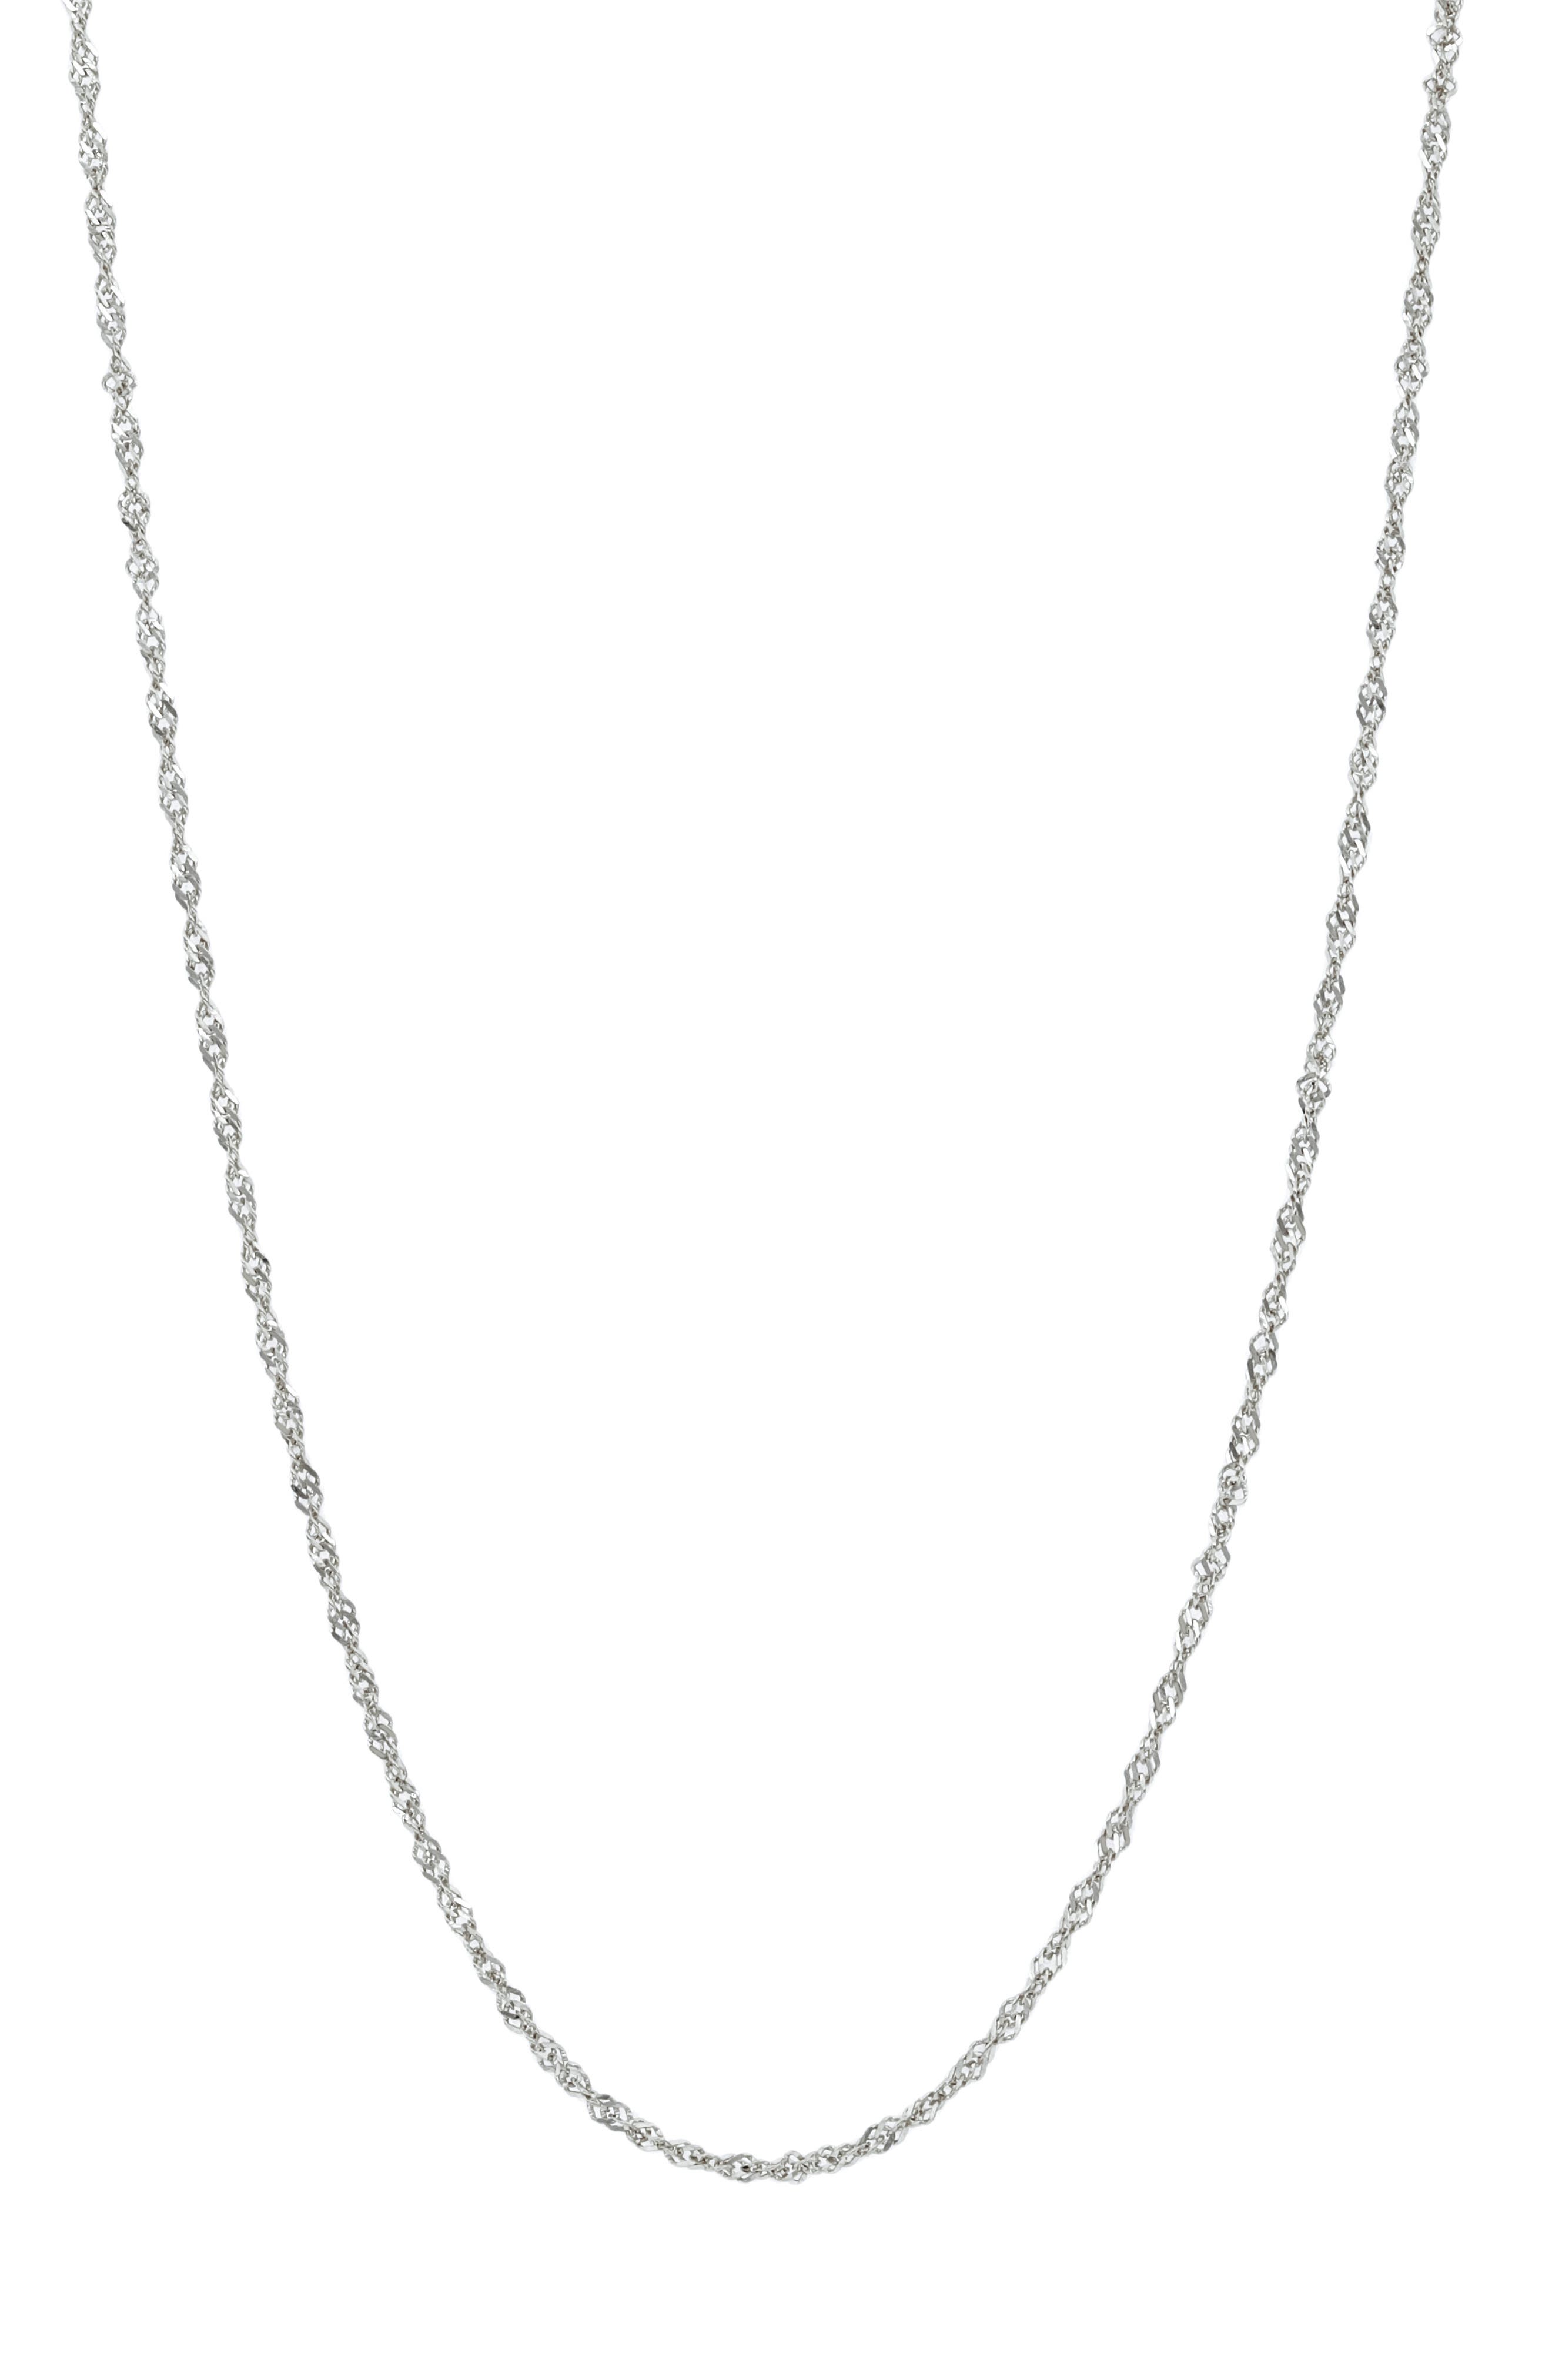 18-Inch Rhodium Plated Necklace with 4mm Rose Birthstone Beads and Sterling Silver Blessed Trinity Charm. 